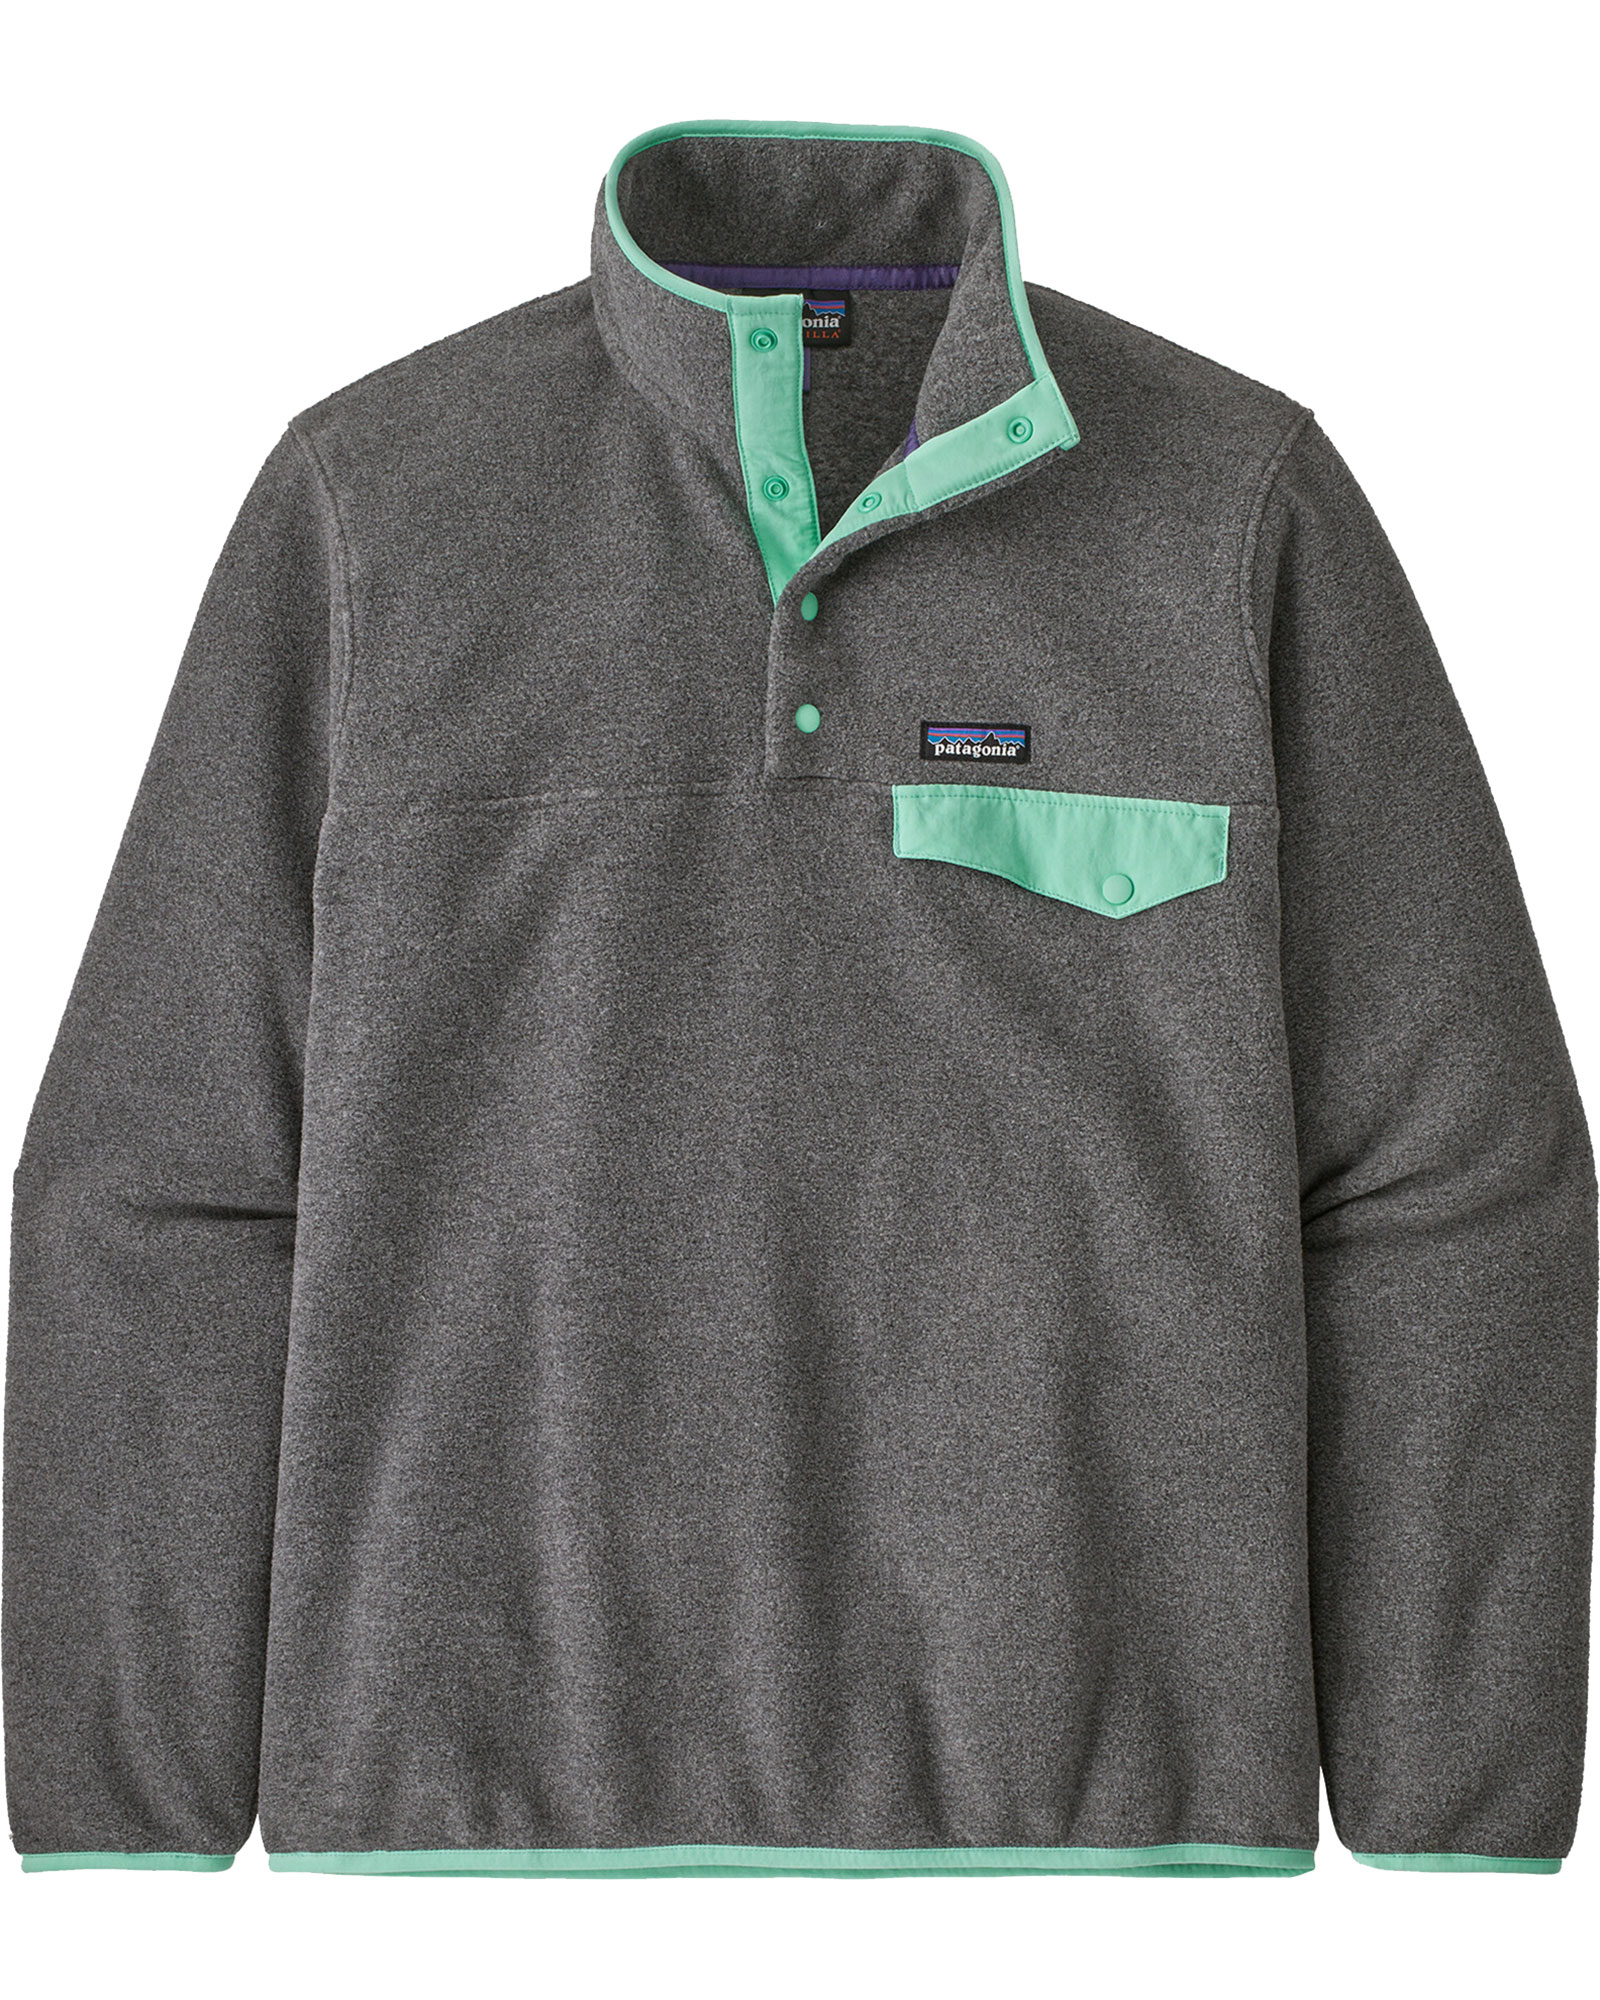 Patagonia Lwt Synchilla Snap T Men’s Pullover - Nicle/Early Teal XL